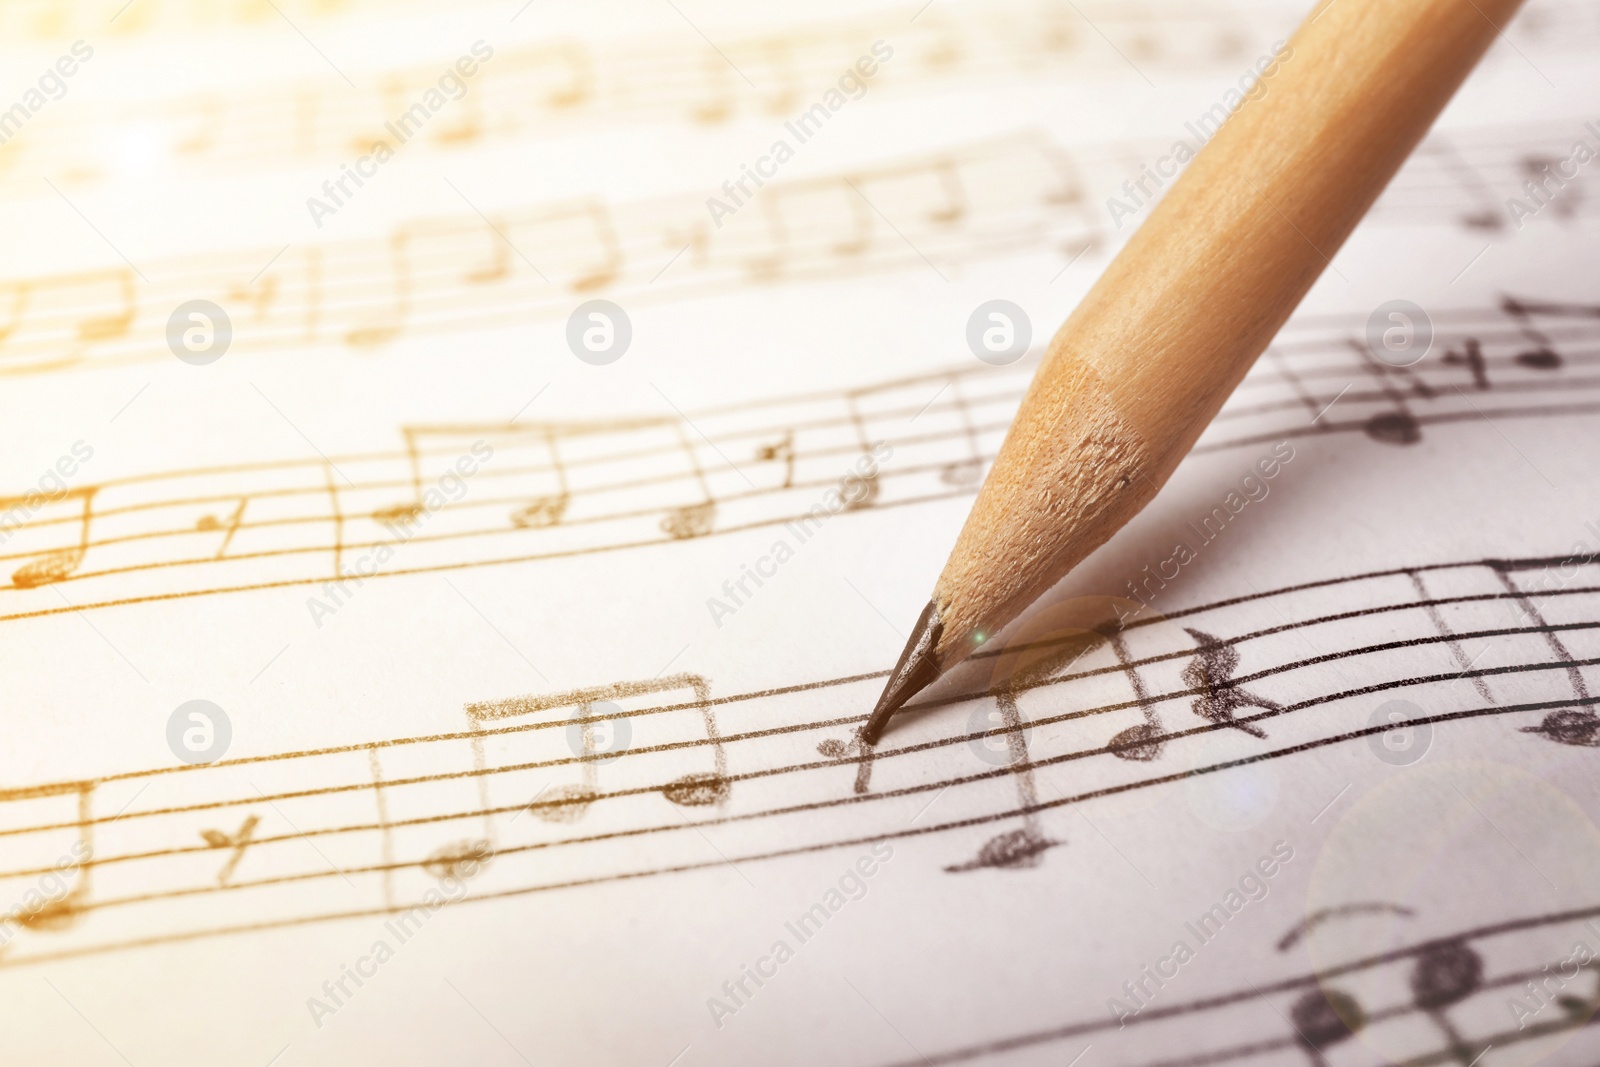 Image of Sheet with music notes and pencil as background, closeup